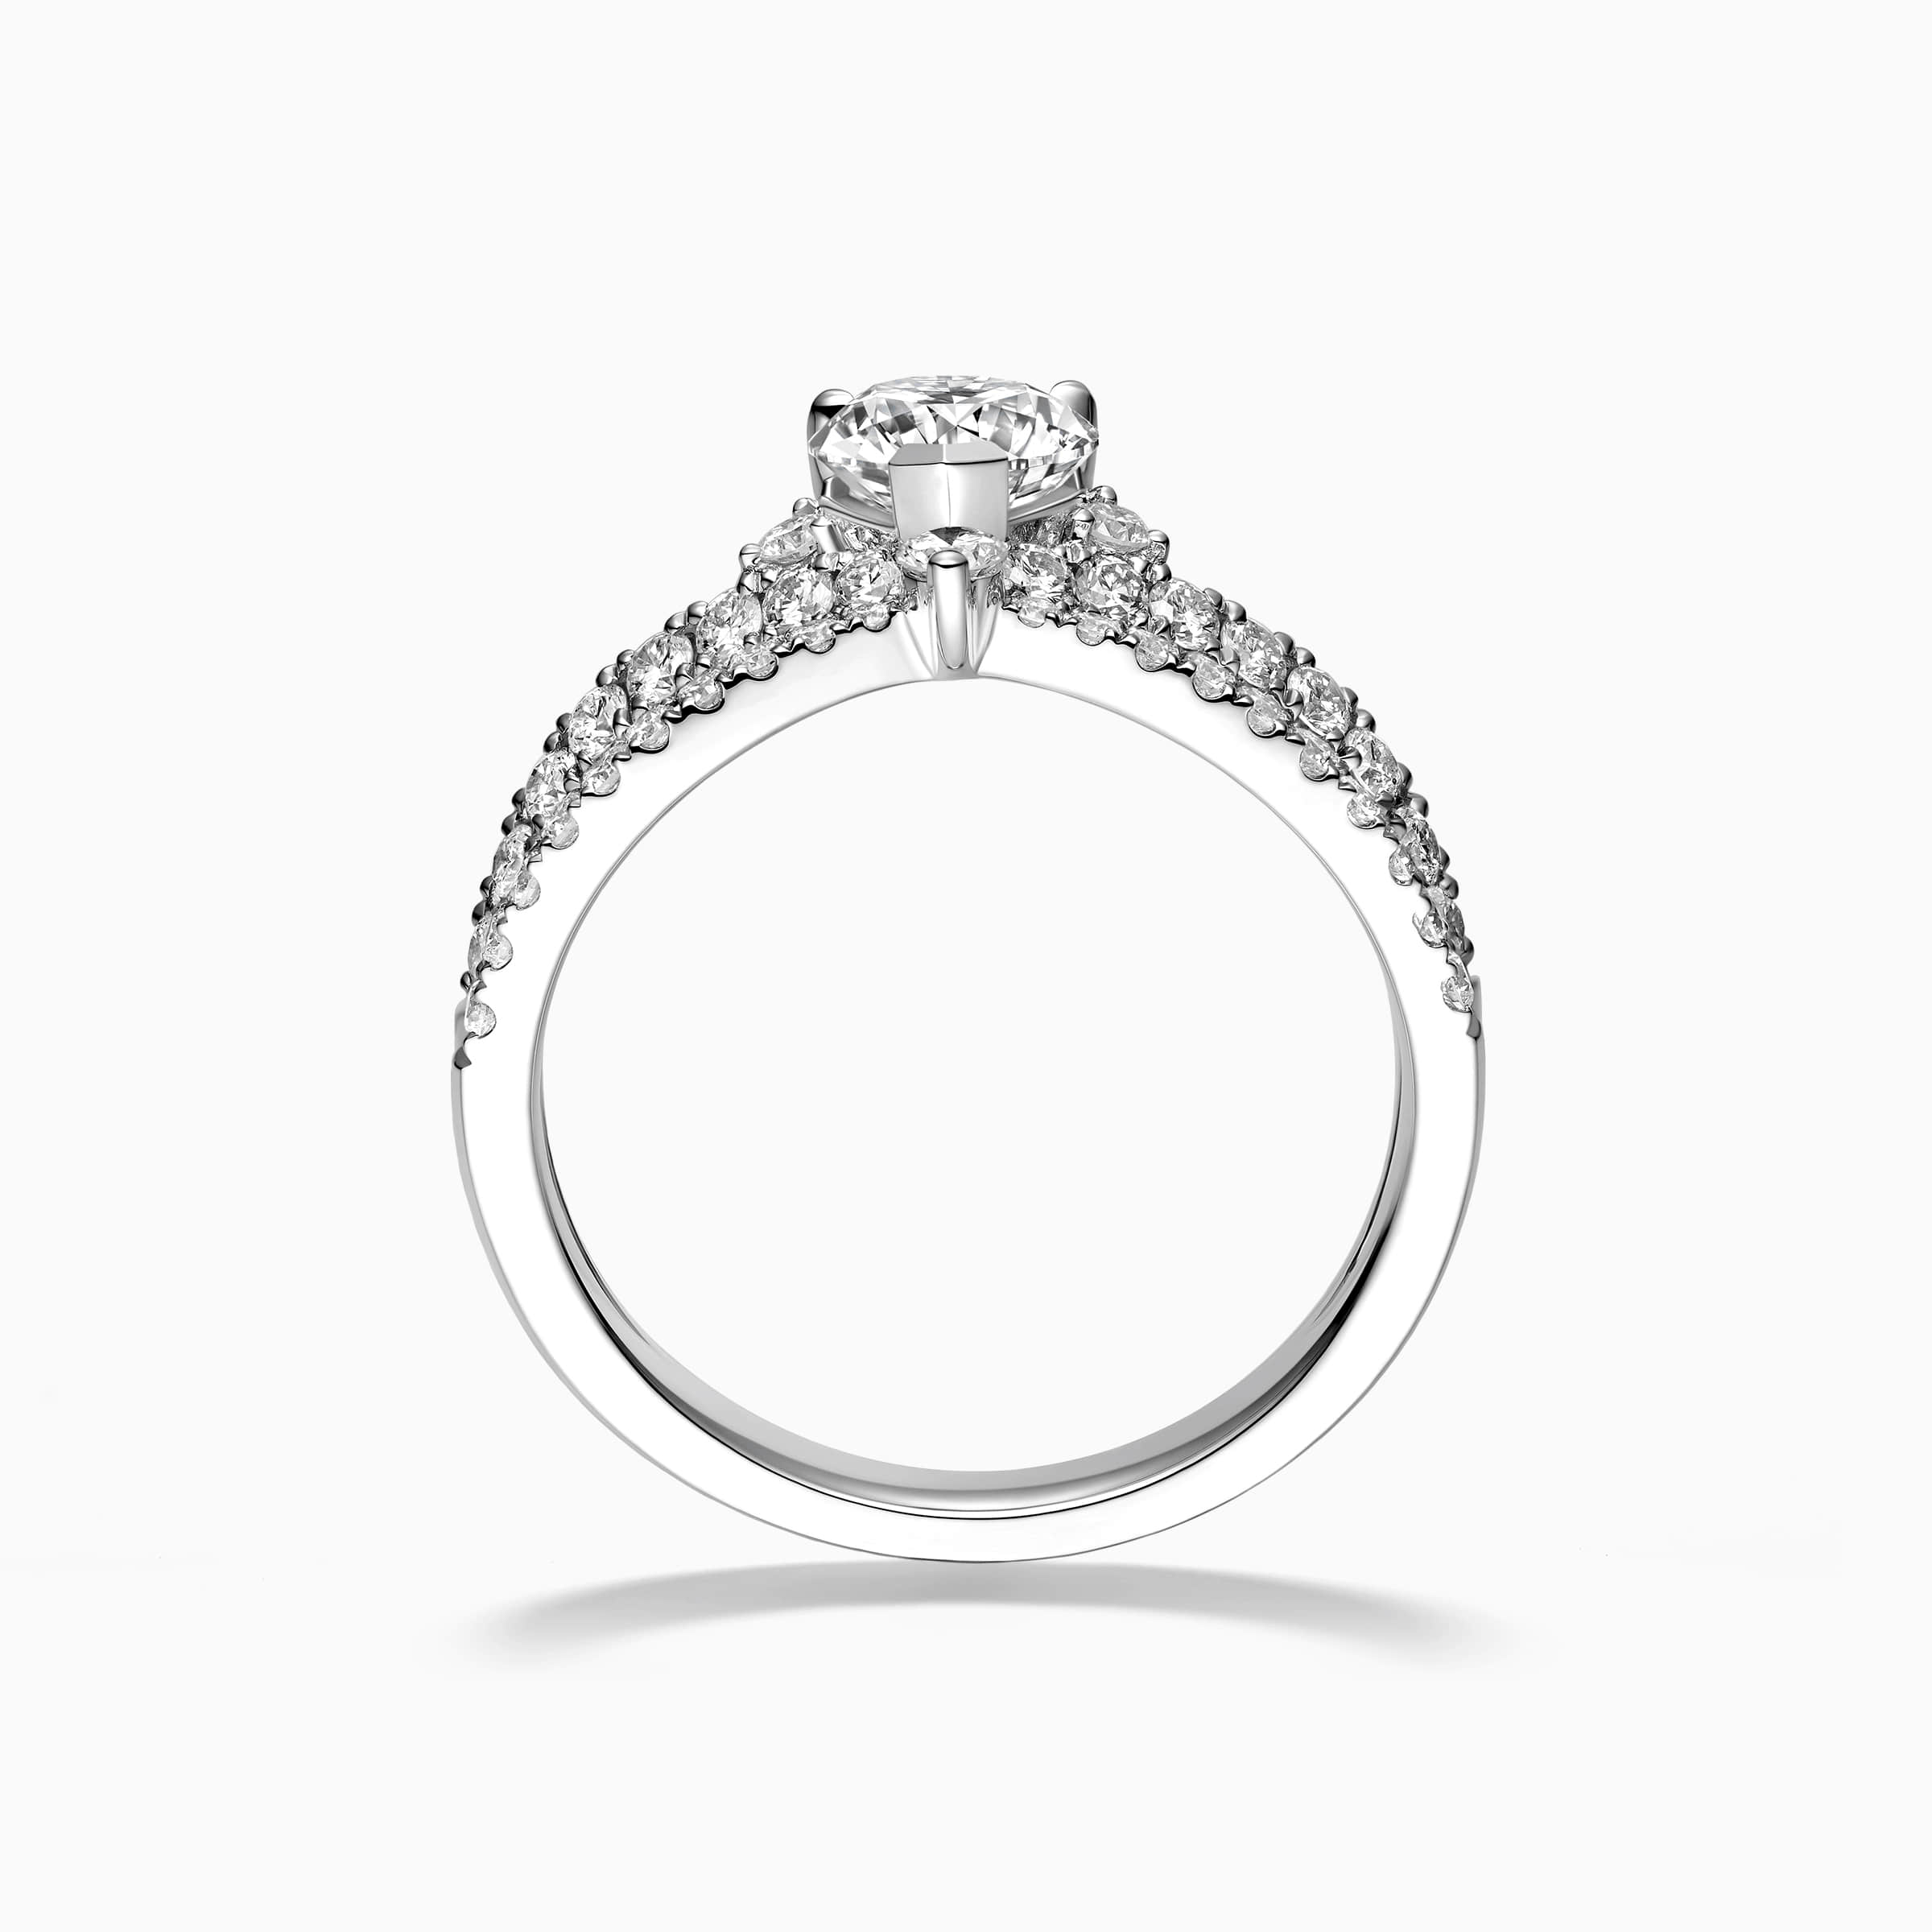 darry ring heart diamond engagement ring side view